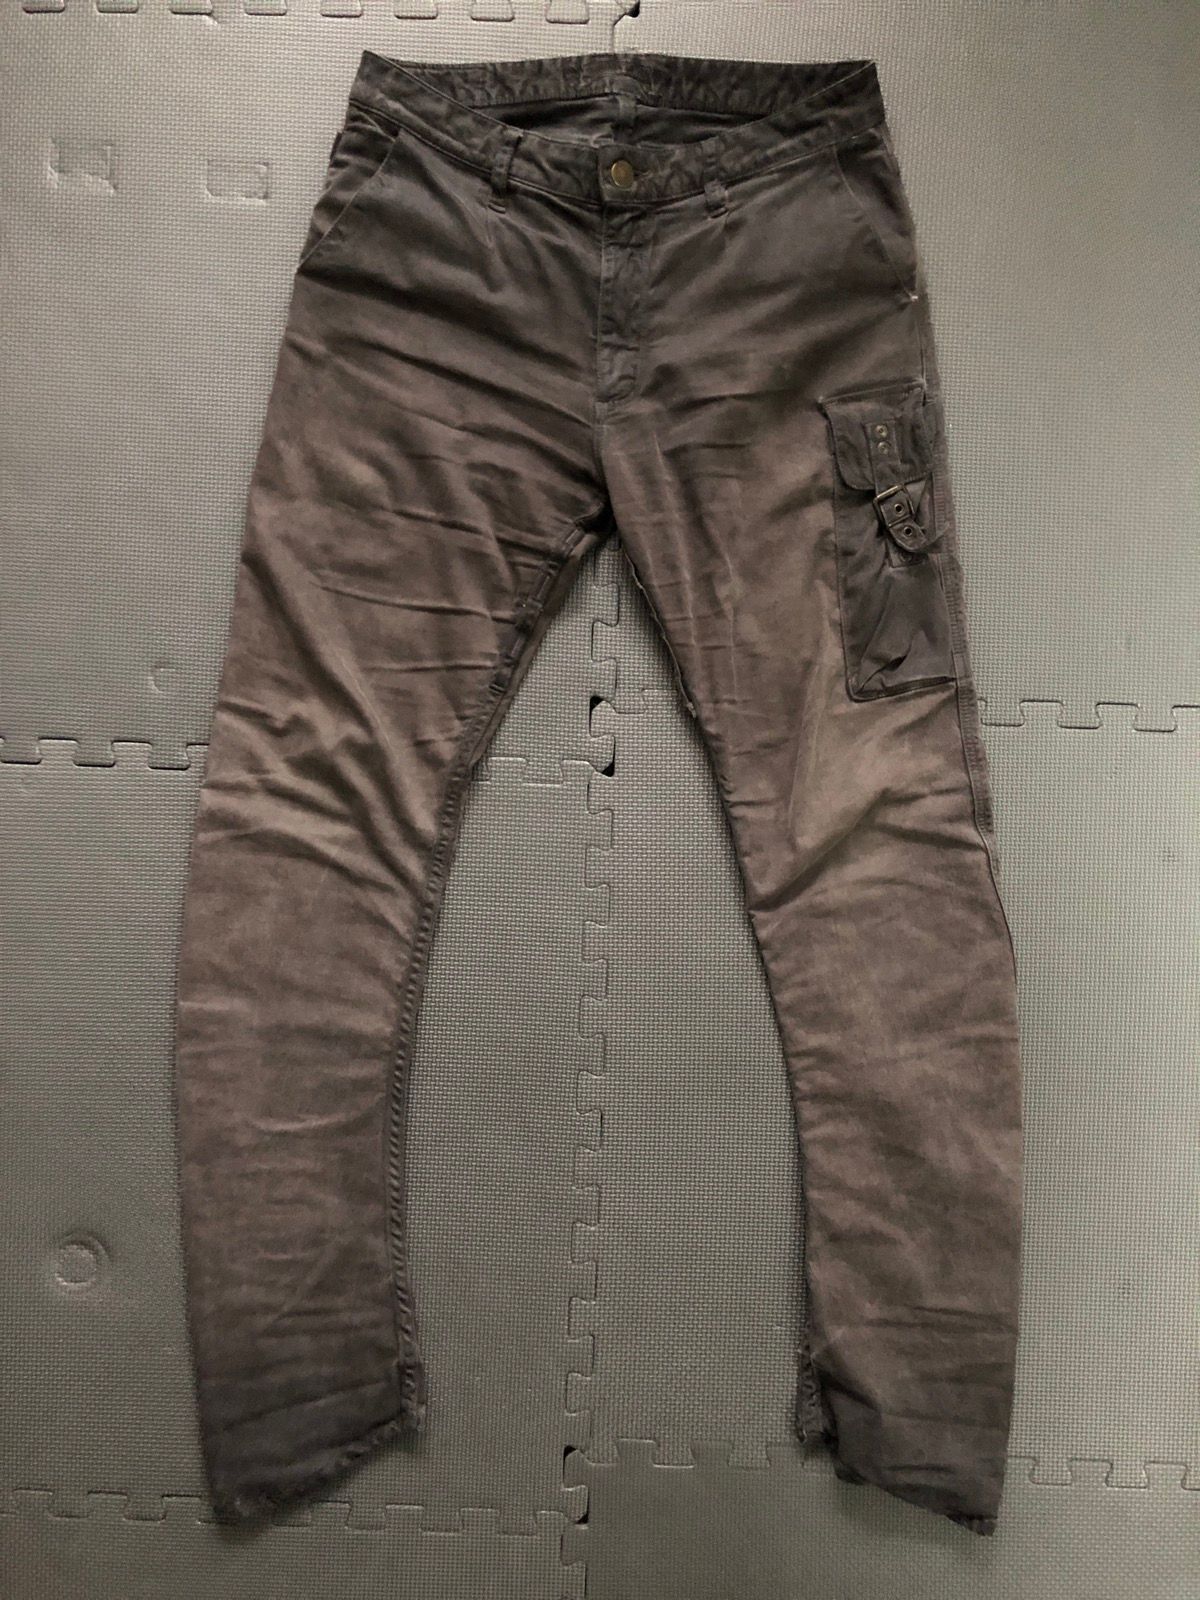 Robins Jeans Classic Gray Stretchy Robin’s Jean 30, Running Big | Grailed